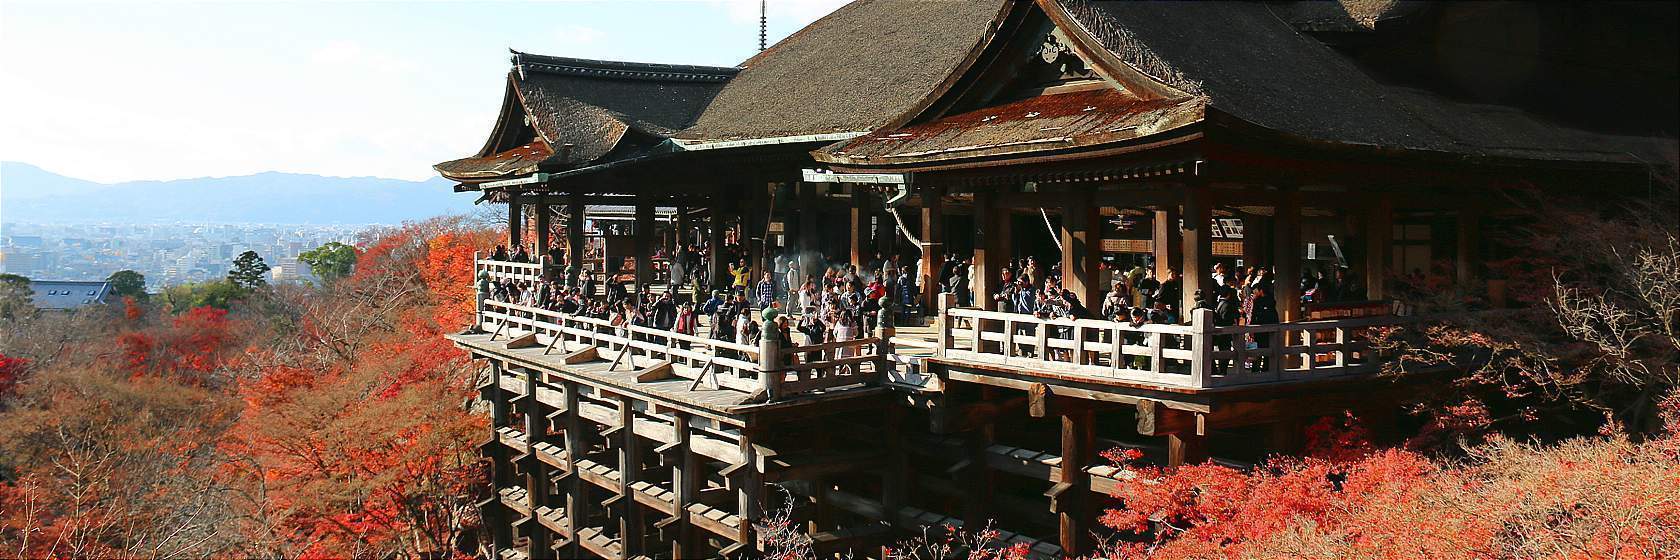 Kyoto Travel Guide What To Do In Kyoto